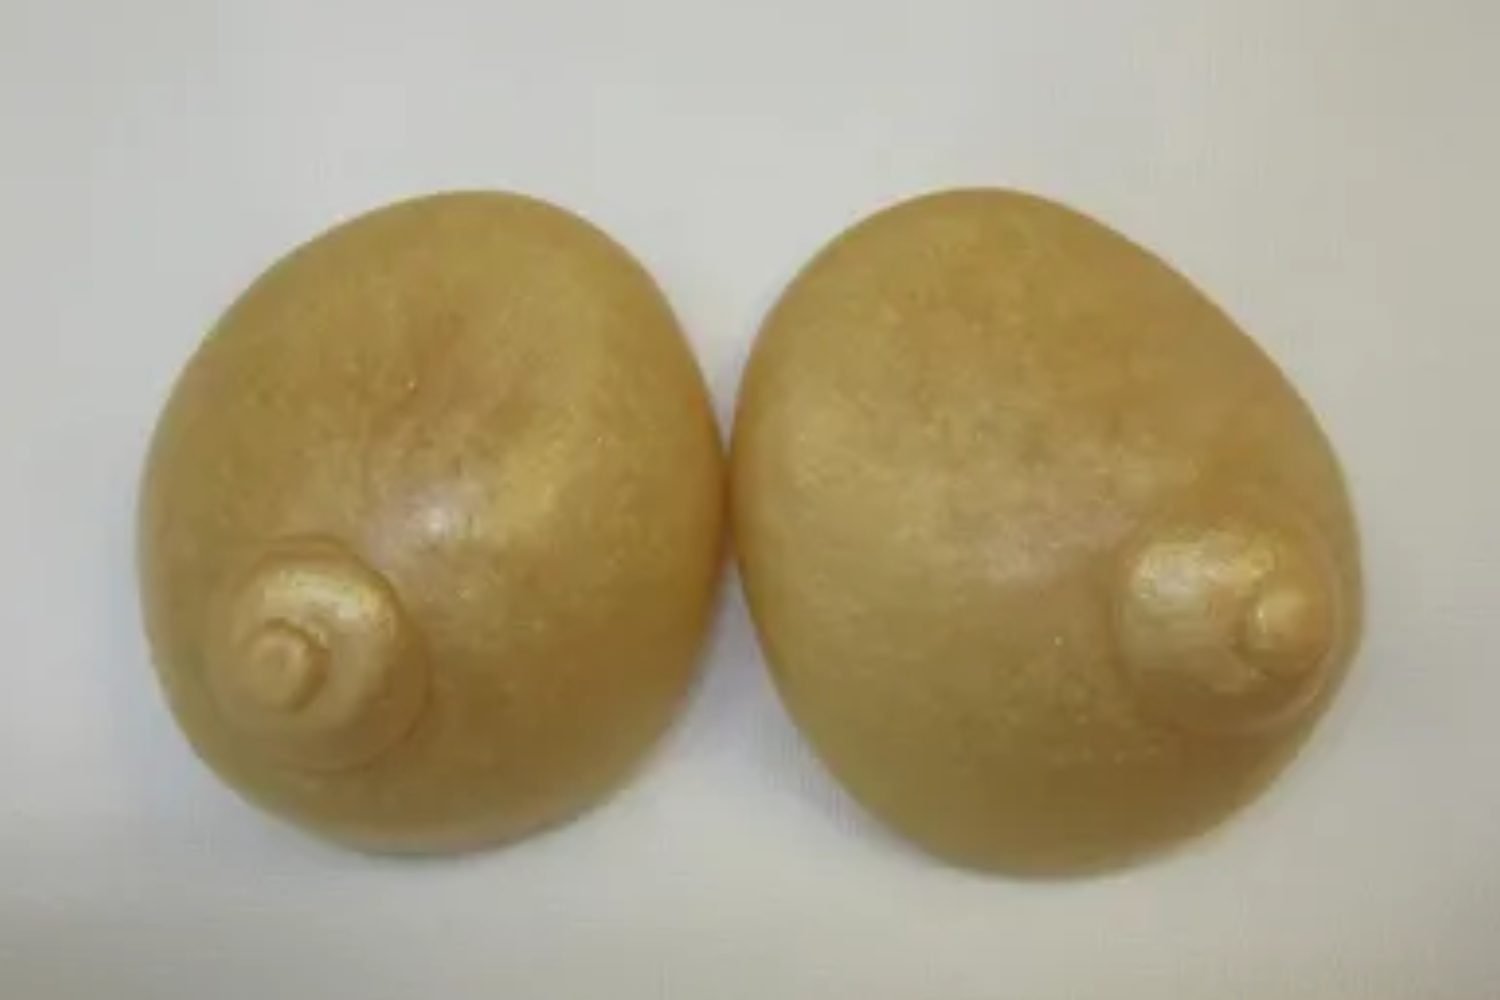 Two large breasts are shown on a white surface.